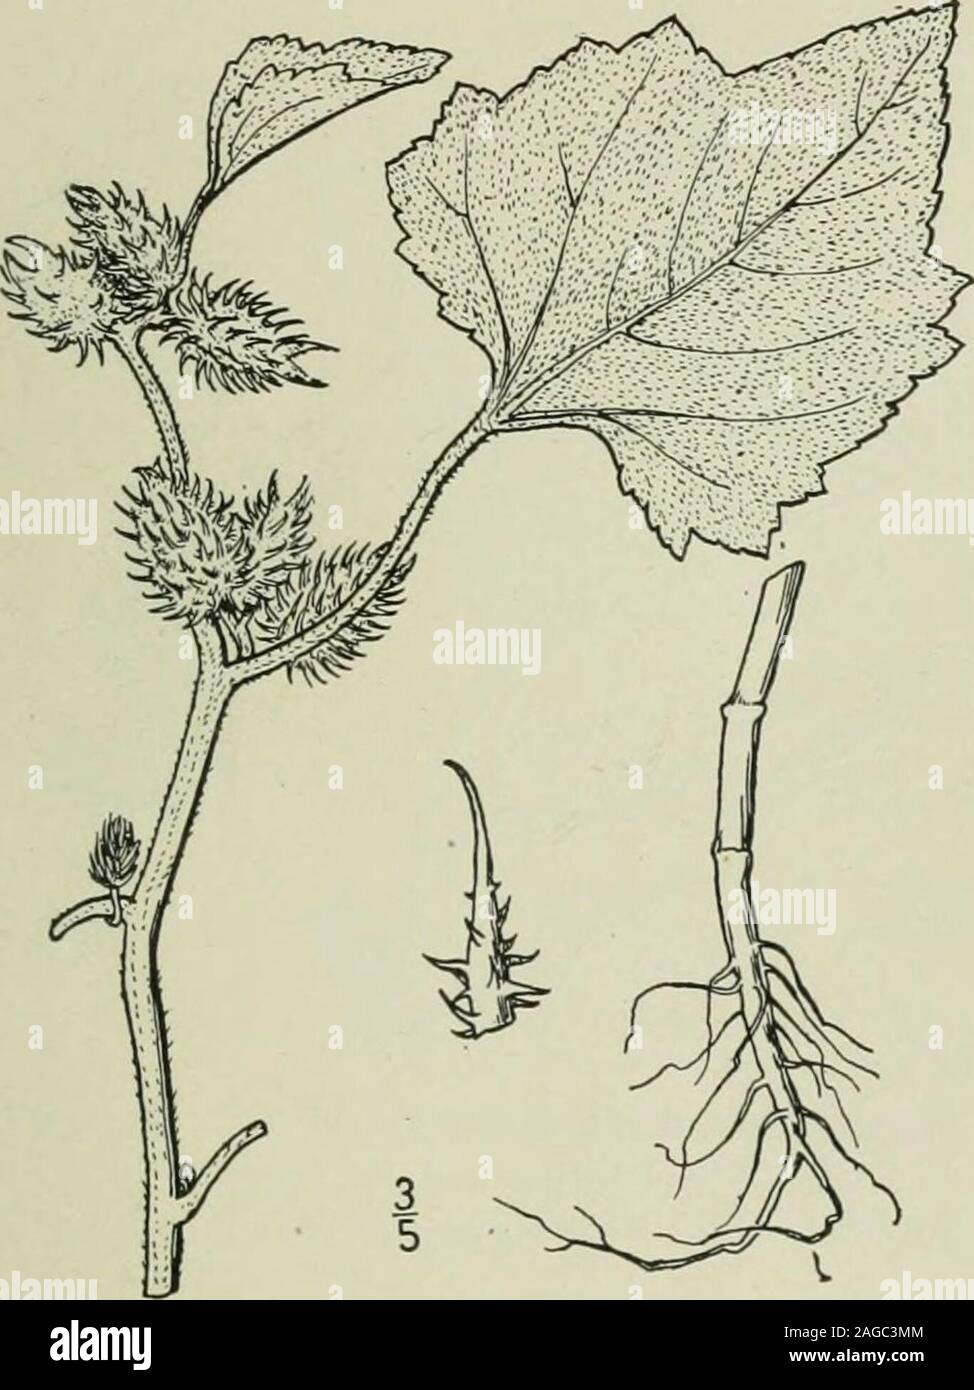 . An illustrated flora of the northern United States, Canada and the British possessions : from Newfoundland to the parallel of the southern boundary of Virginia and from the Atlantic Ocean westward to the 102nd meridian. Genus 4. RAGWEED FAMILY. 345 3. Xanthium echinatum ]Iurr.Fig. 4134- 3each Clotbur. X. echinatum Murr. Comm. Goett. 6 : 32, pi. 4. 1783. X. macniatuin Raf. Am. Month. Mag. 344. 1818. X. oviforme Wallr. Beitr. Bot. i : 240. 1842. Stem rough, purplish or purple-blotched, l°-2° high.Leaves firm, scabrous, with scattered short papillosehairs, obtusely toothed and lobed, somewhat Stock Photo